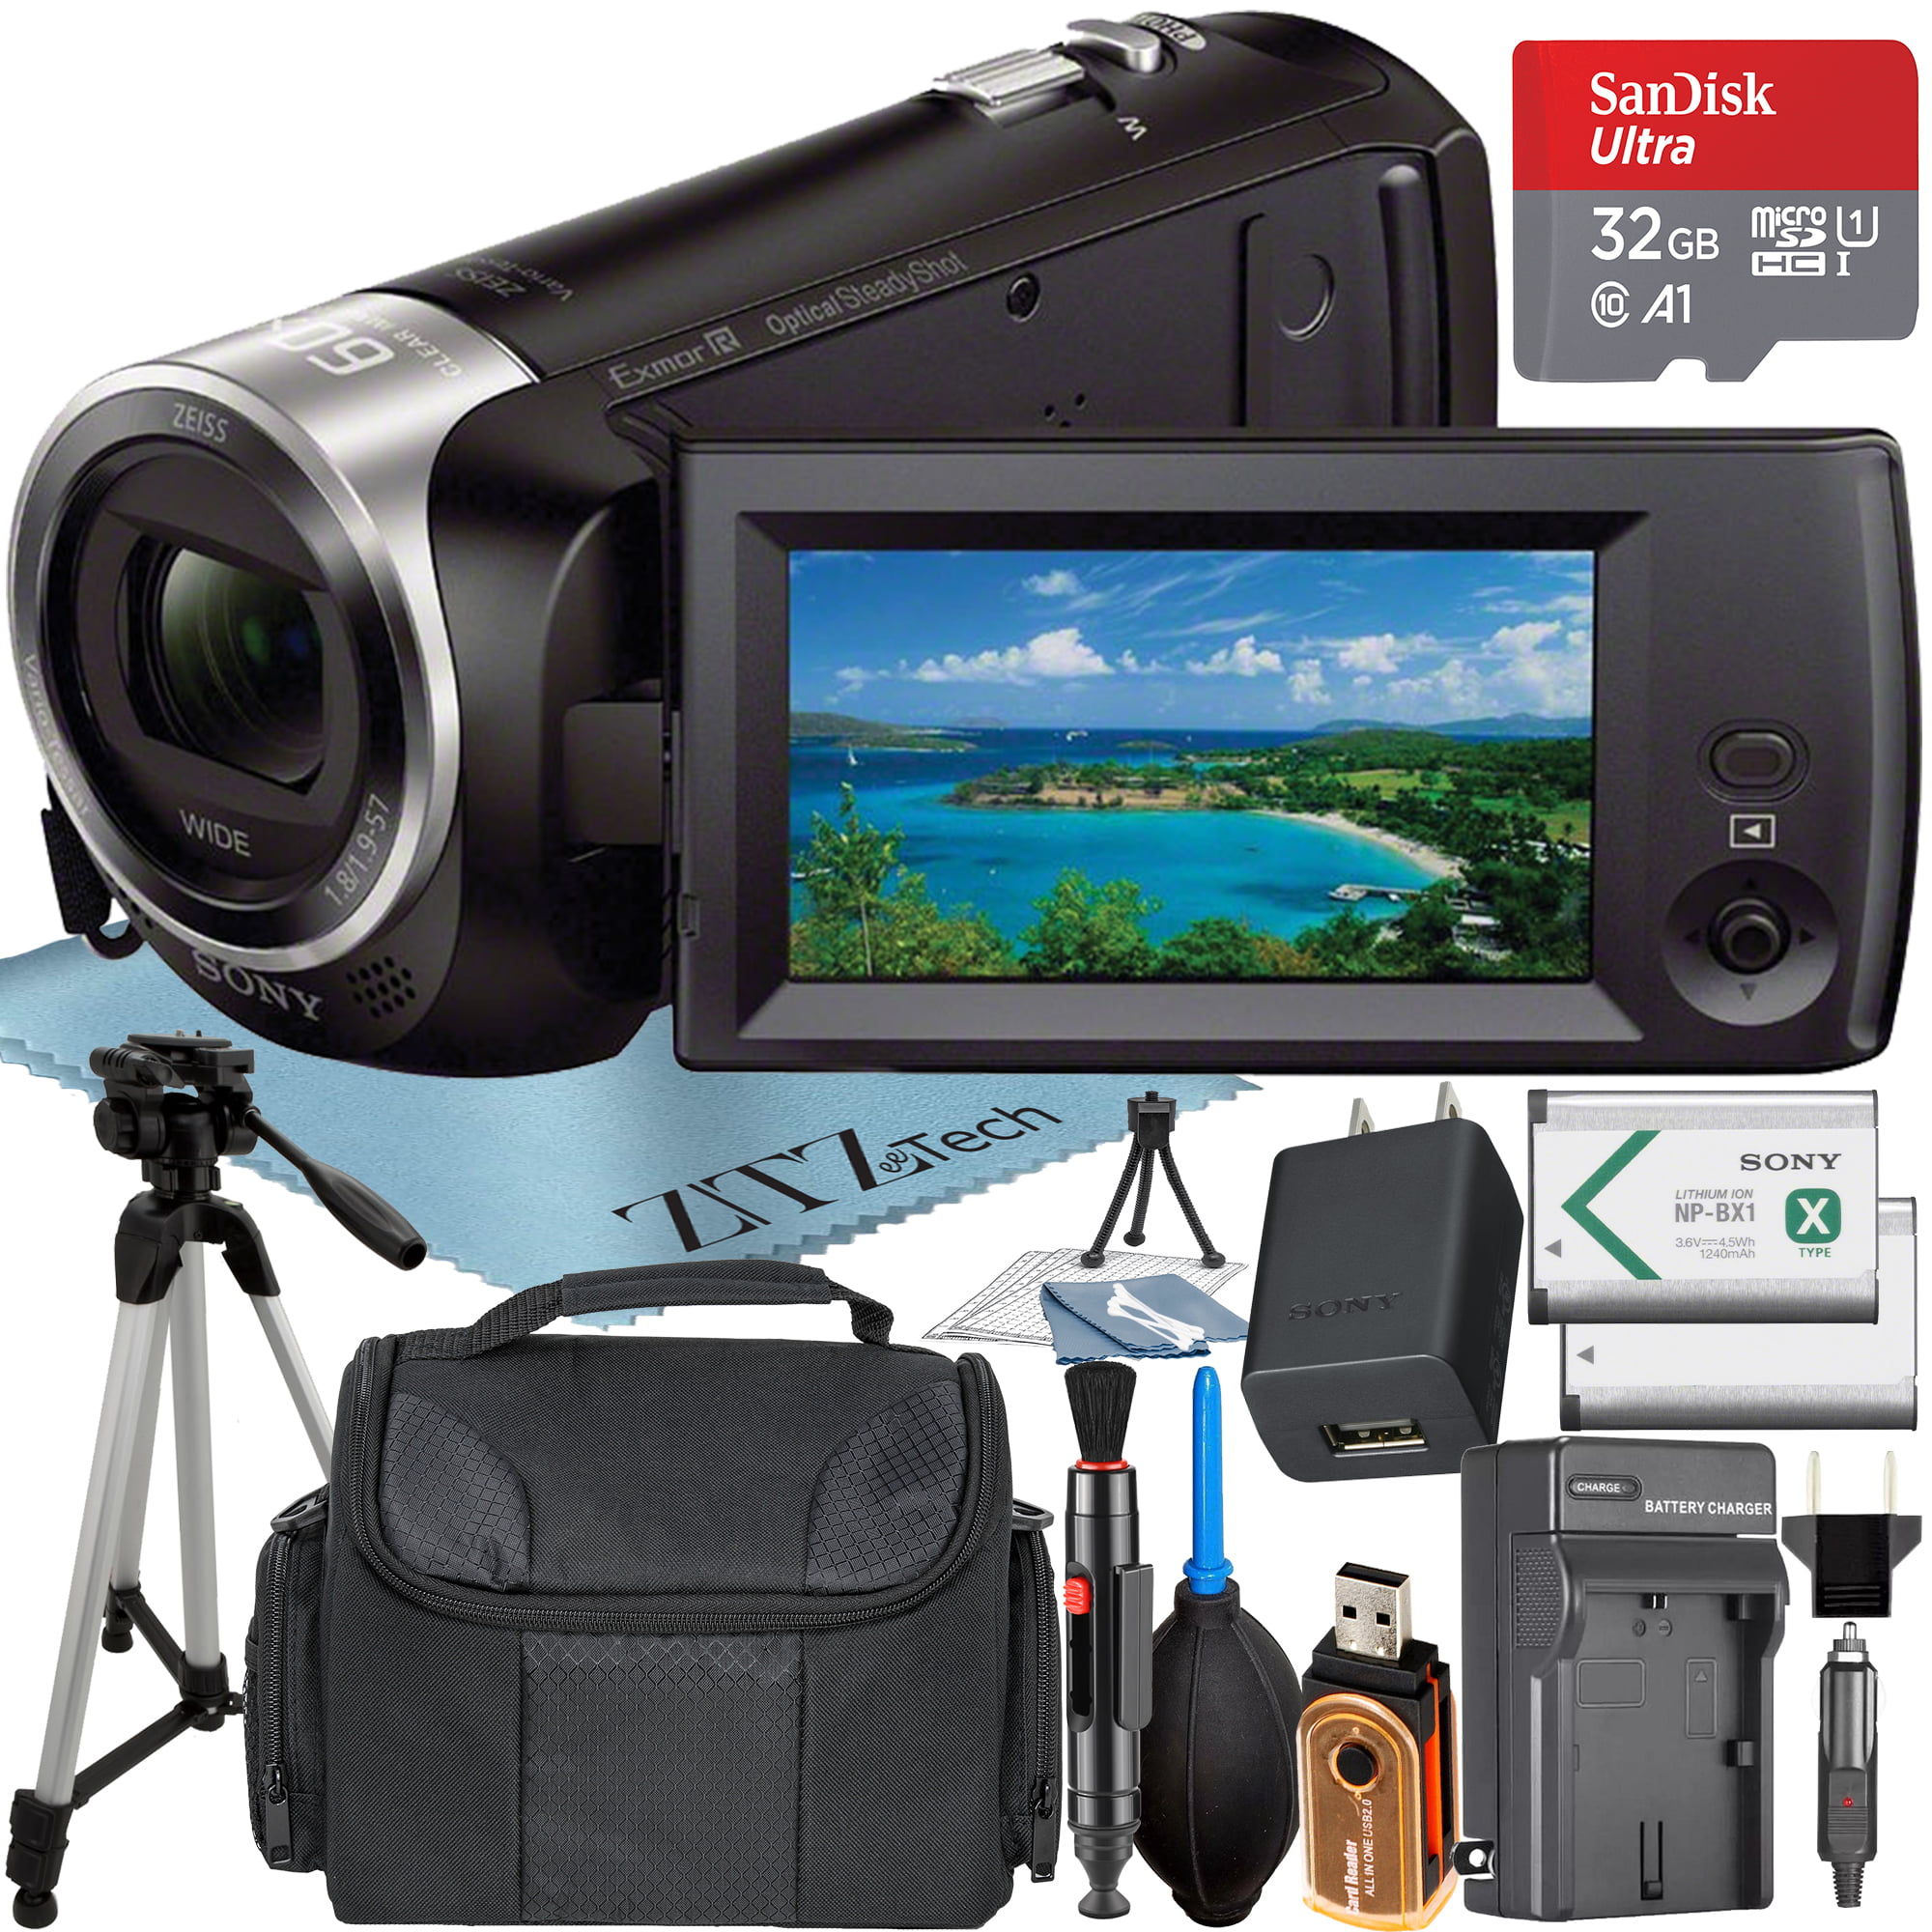 Sony HDR-CX405 HD Handycam Camcorder Video Recording with 32GB Micro SD Memory Card + Charger + Case + Tripod + ZeeTech Accessory Bundle